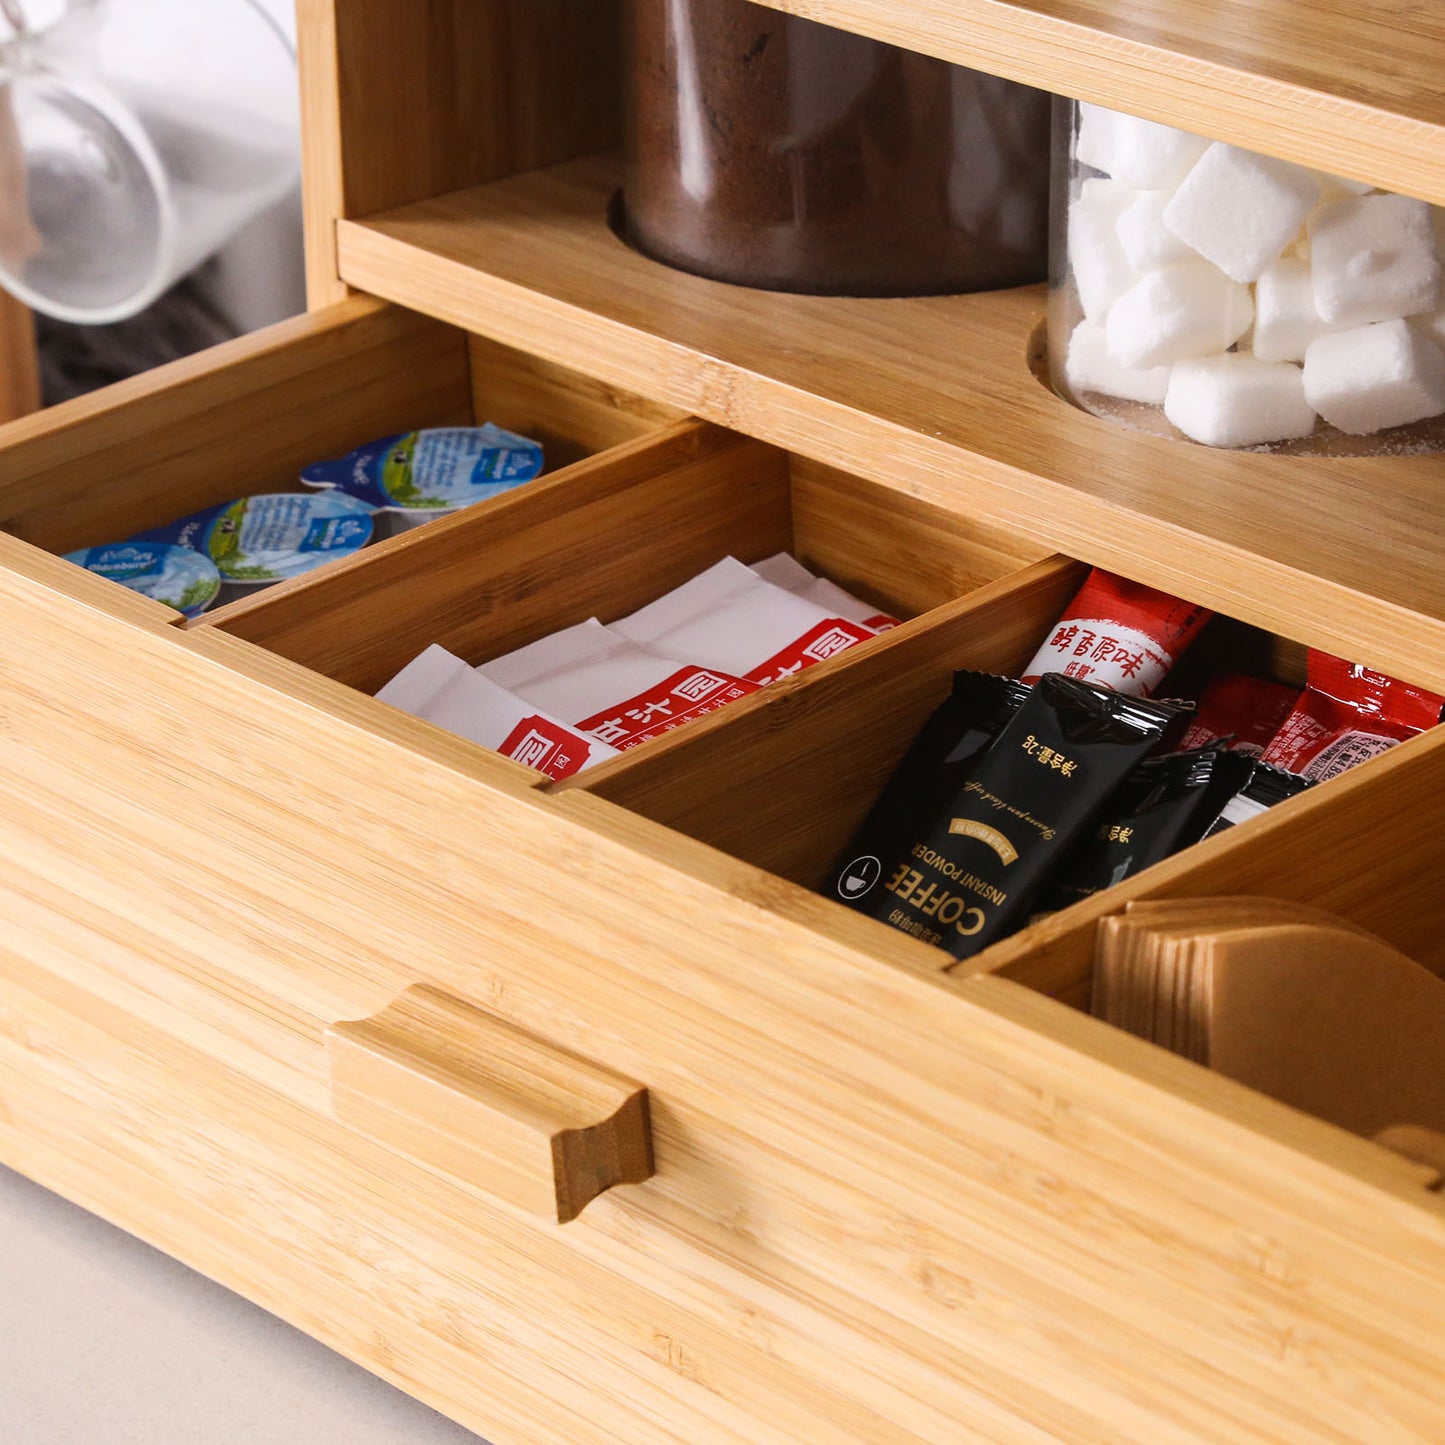 Soulhand Coffee Station Organizer with Drawer, Wooden Coffee Bar Accessories Organizer for Countertop, 48 Large Coffee Pods Storage Organizer, K-Cup